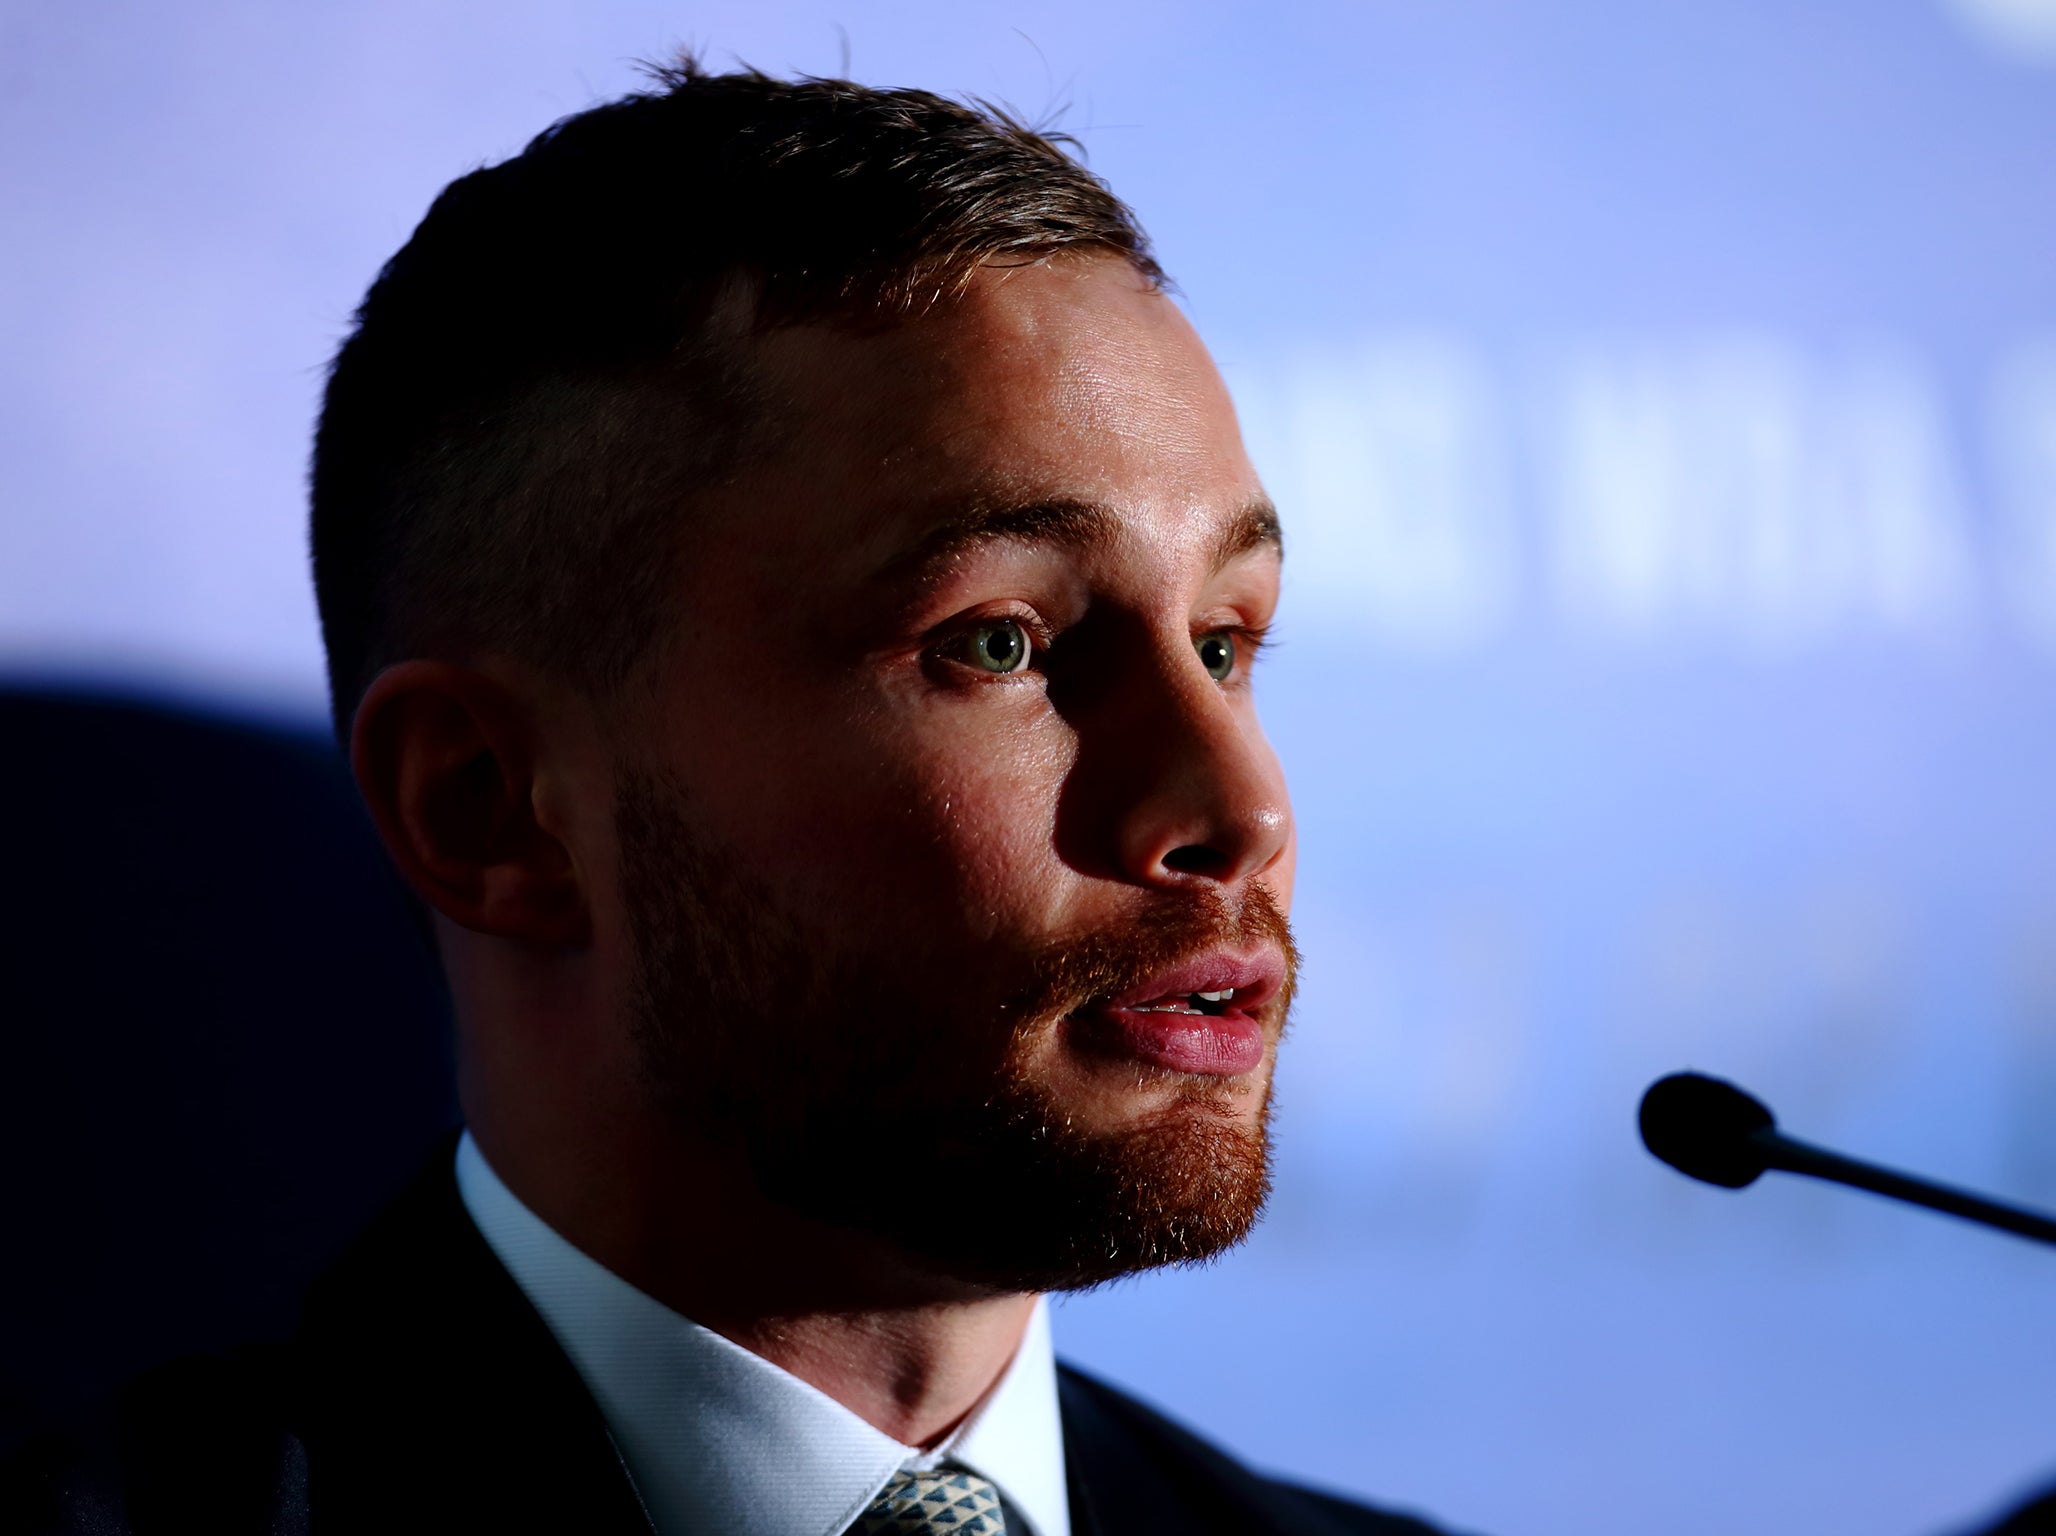 Frampton has signed with Frank Warren Promotions